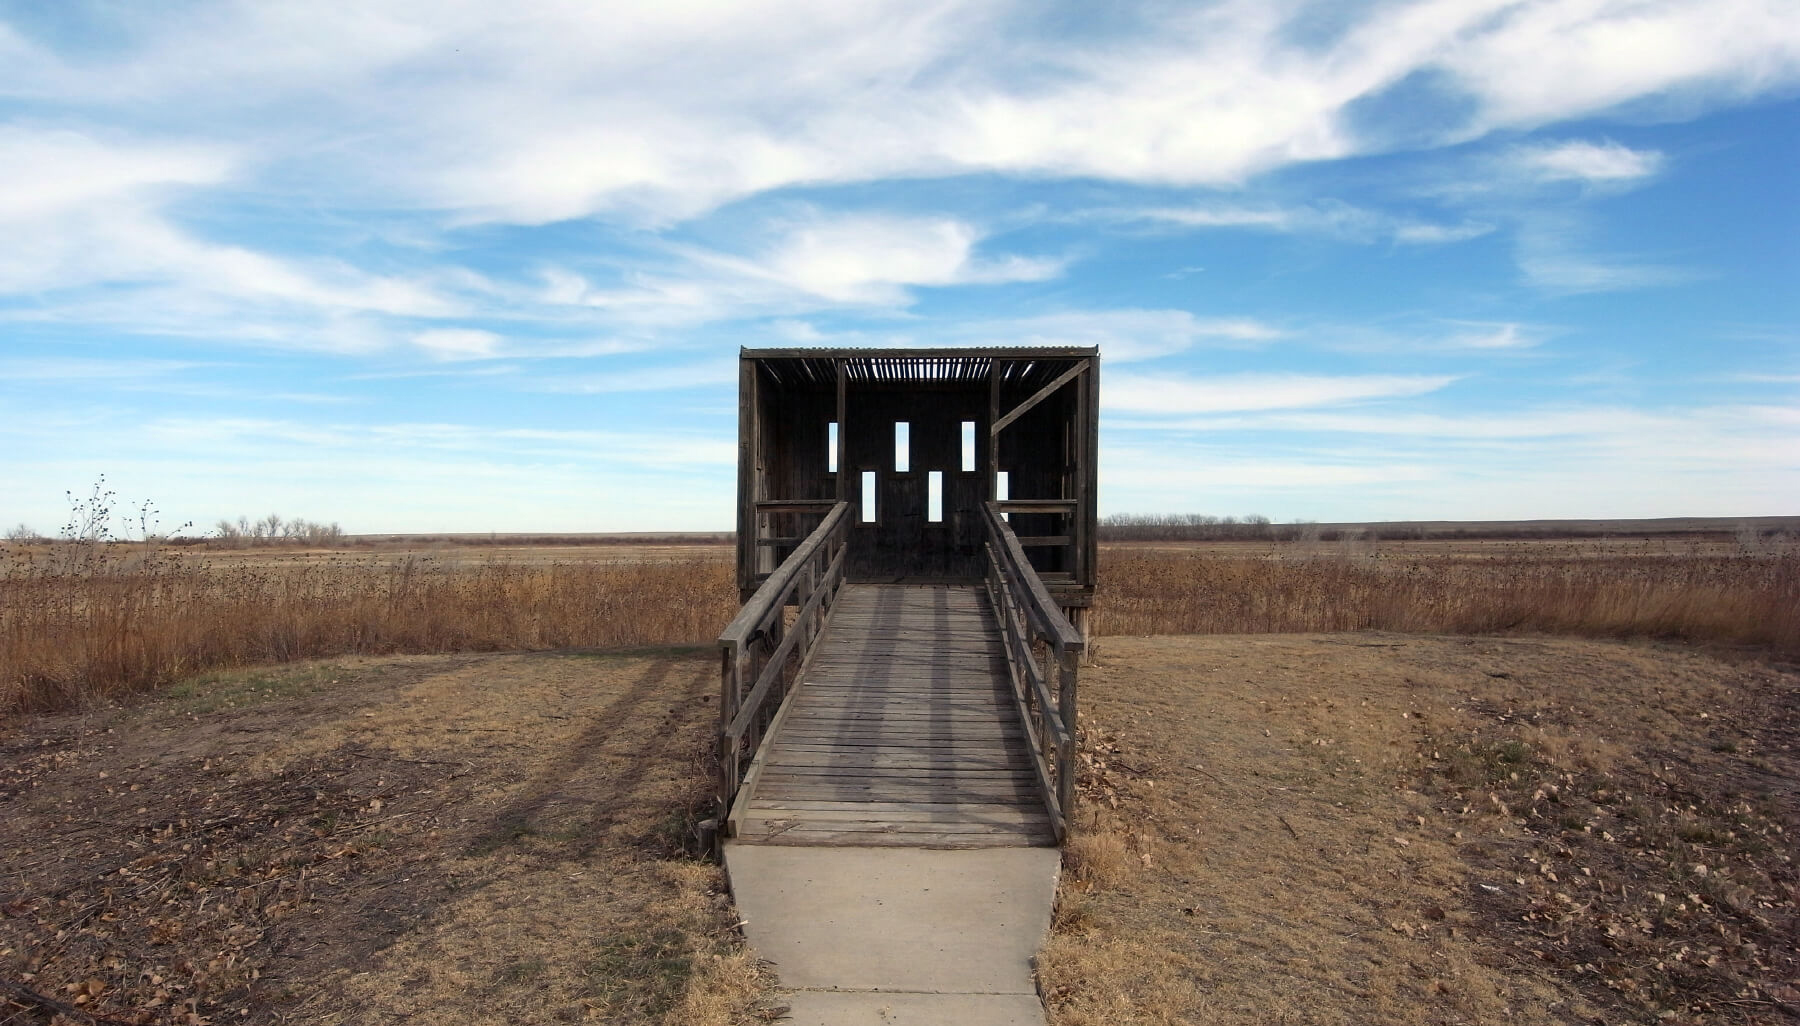 A wooden bird blind in a large brown field under a blue sky with clouds